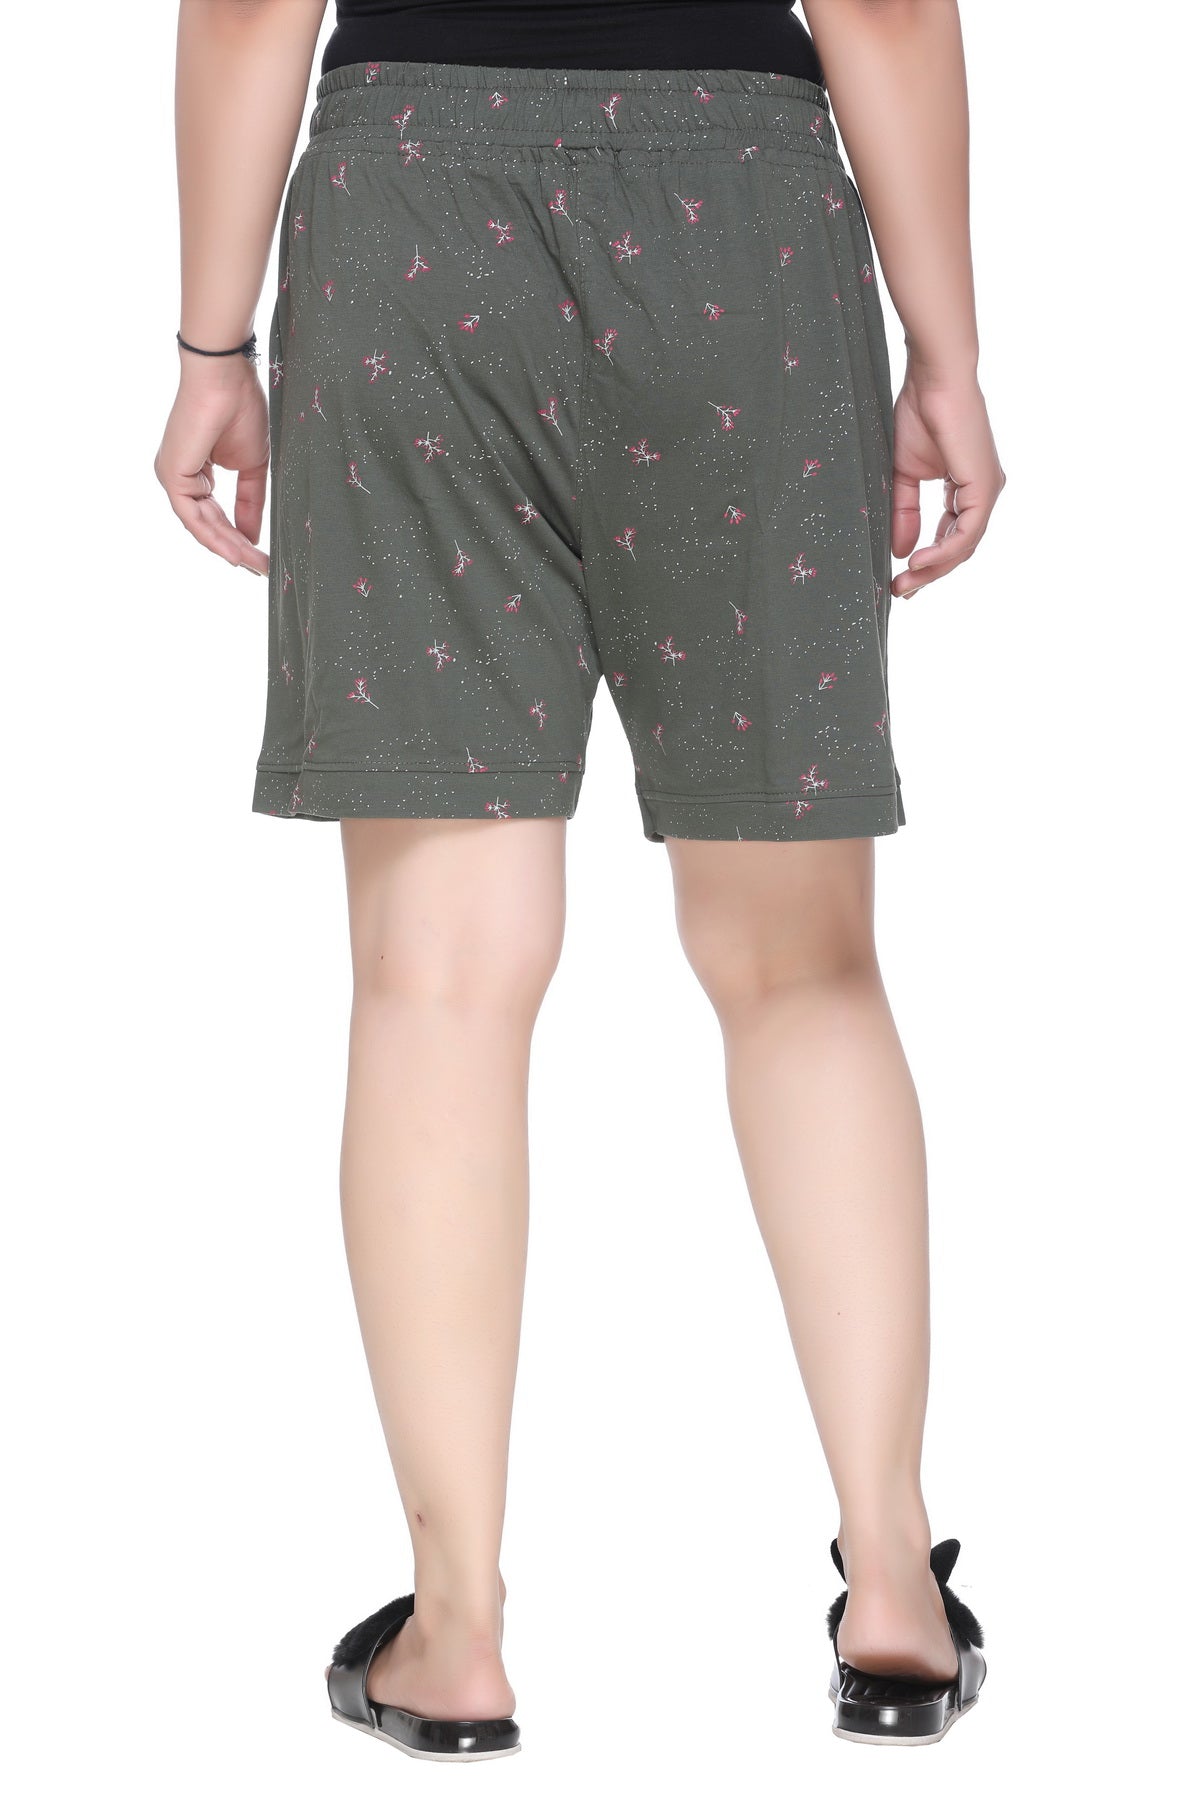 CUPID Plus Size Comfortable Barmuda/Shorts for Sports, Yoga, Daily Use Gym, Night Wear, Casual Wear for Women (Olive Green) freeshipping - Cupid Clothings